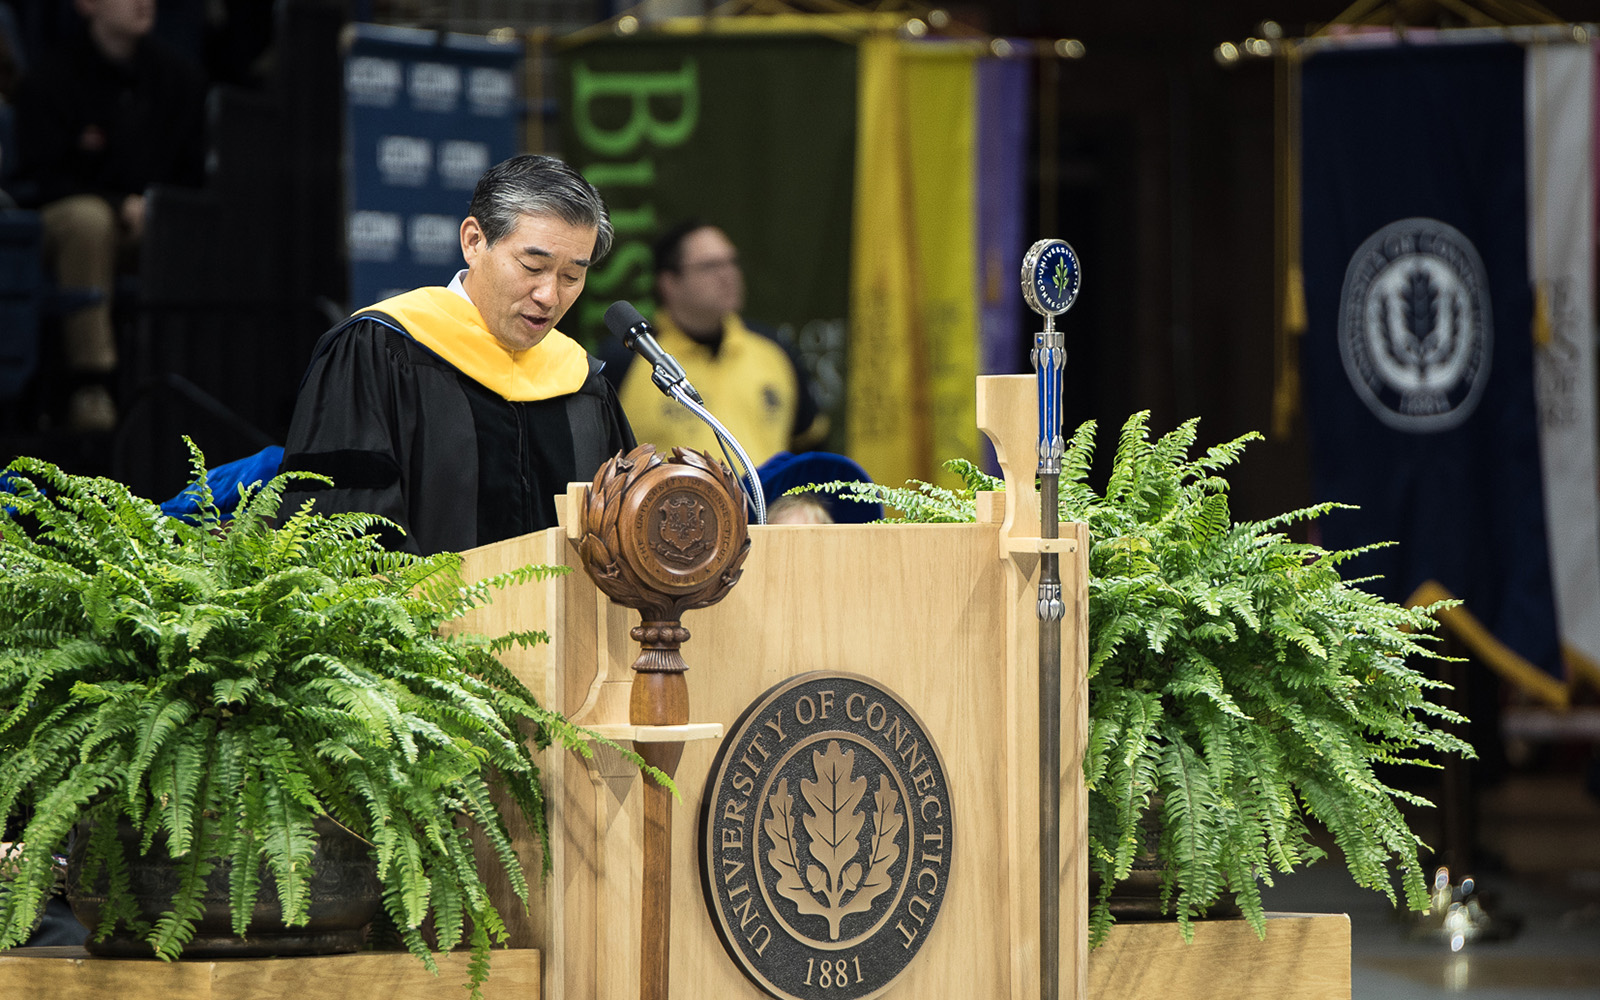 John Y. Kim '87 MBA, president and CIO of New York Life, offers advice to School of Business graduates during commencement on May 8. (Nathan Oldham/UConn School of Business)